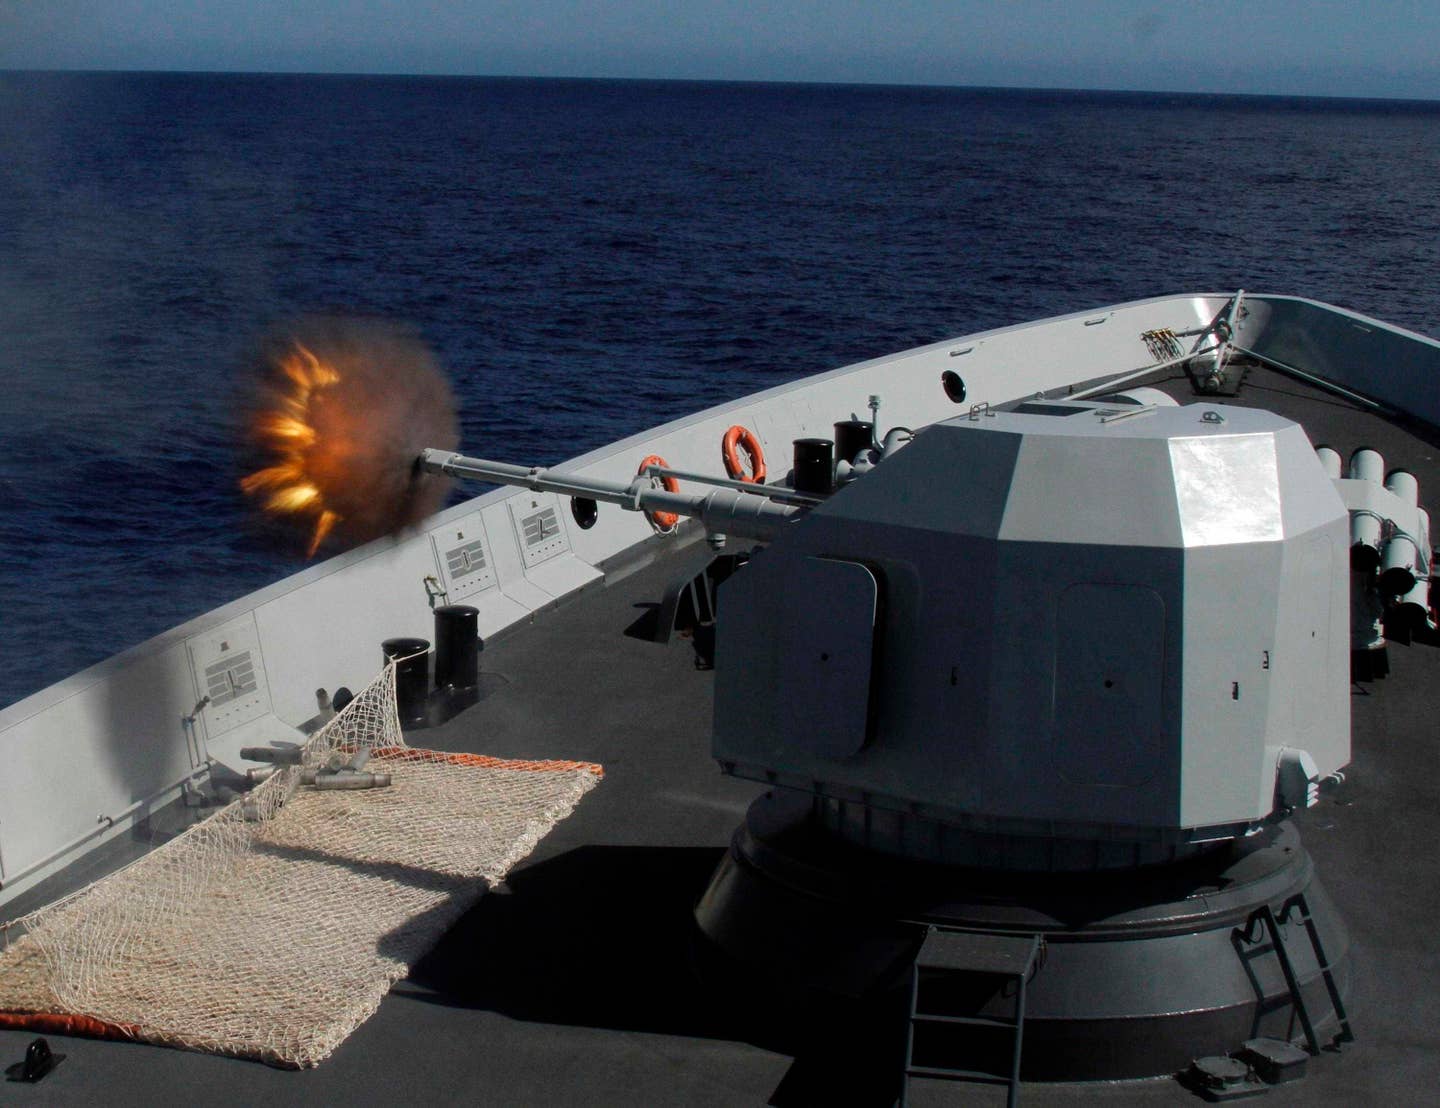 The Chinese Navy frigate Hengshui fires its main gun at a towed target during Rim of the Pacific 2016. (Photo: Chinese Navy Senior Capt. Liu Wenping)